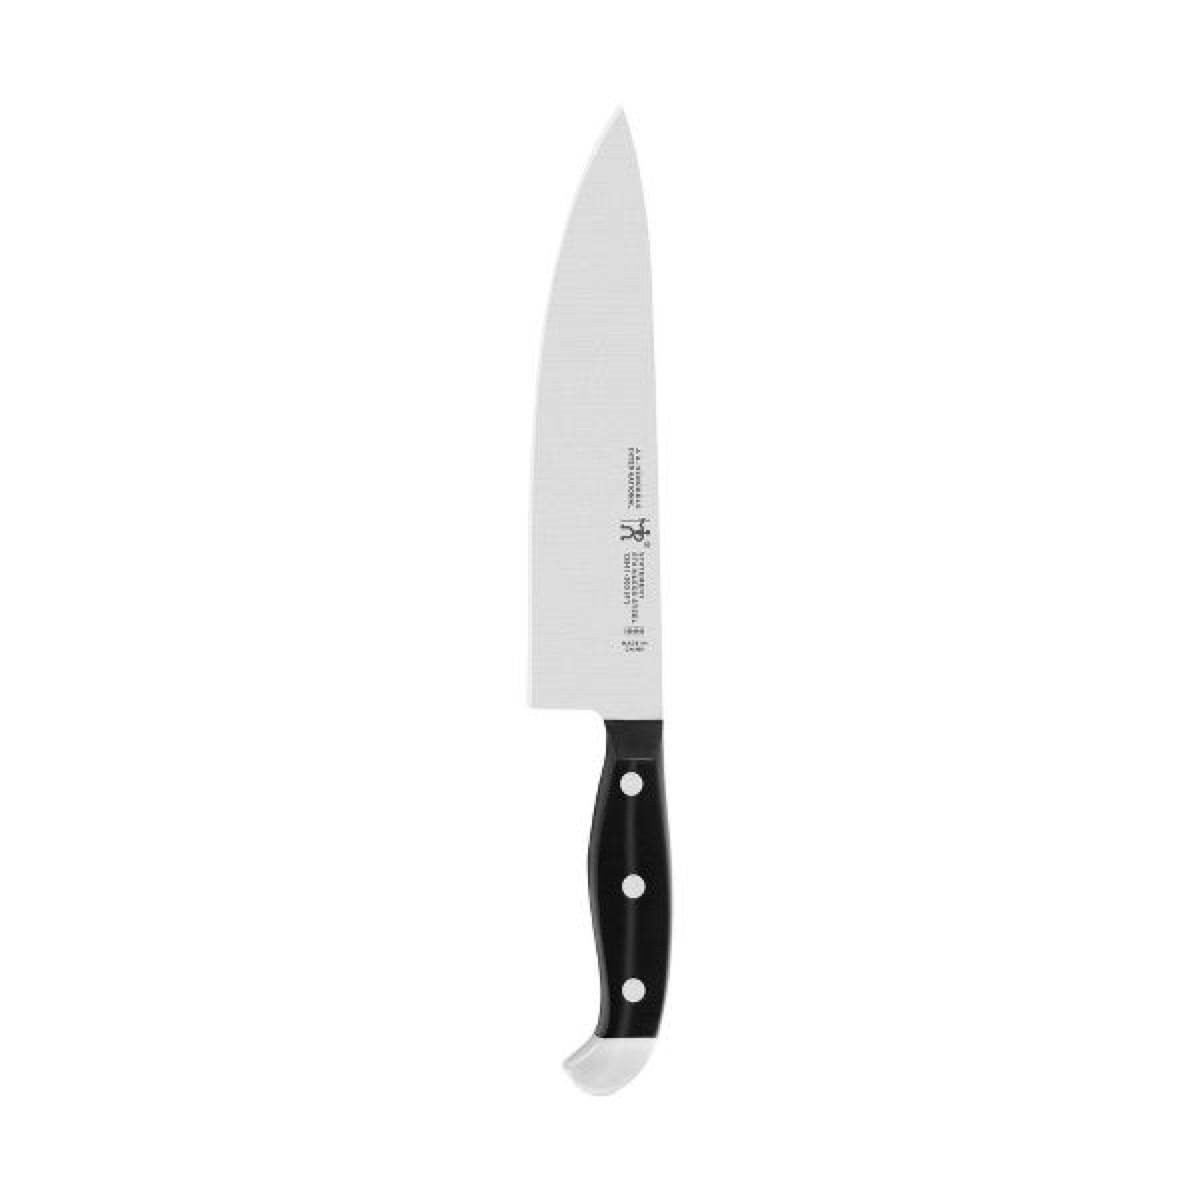 product still from Target of henckels statement chef knife